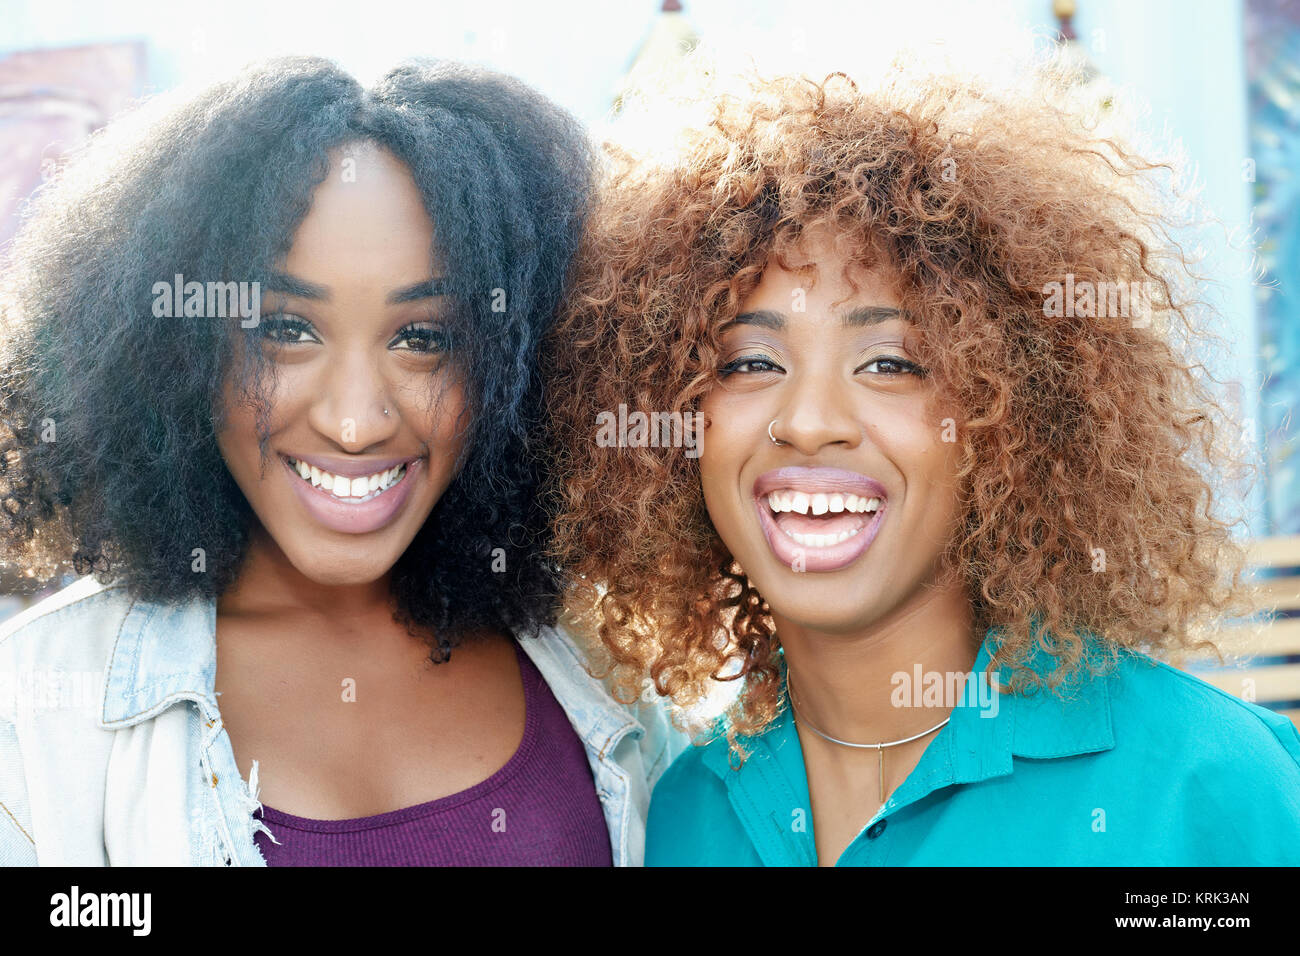 Close up of smiling women Banque D'Images